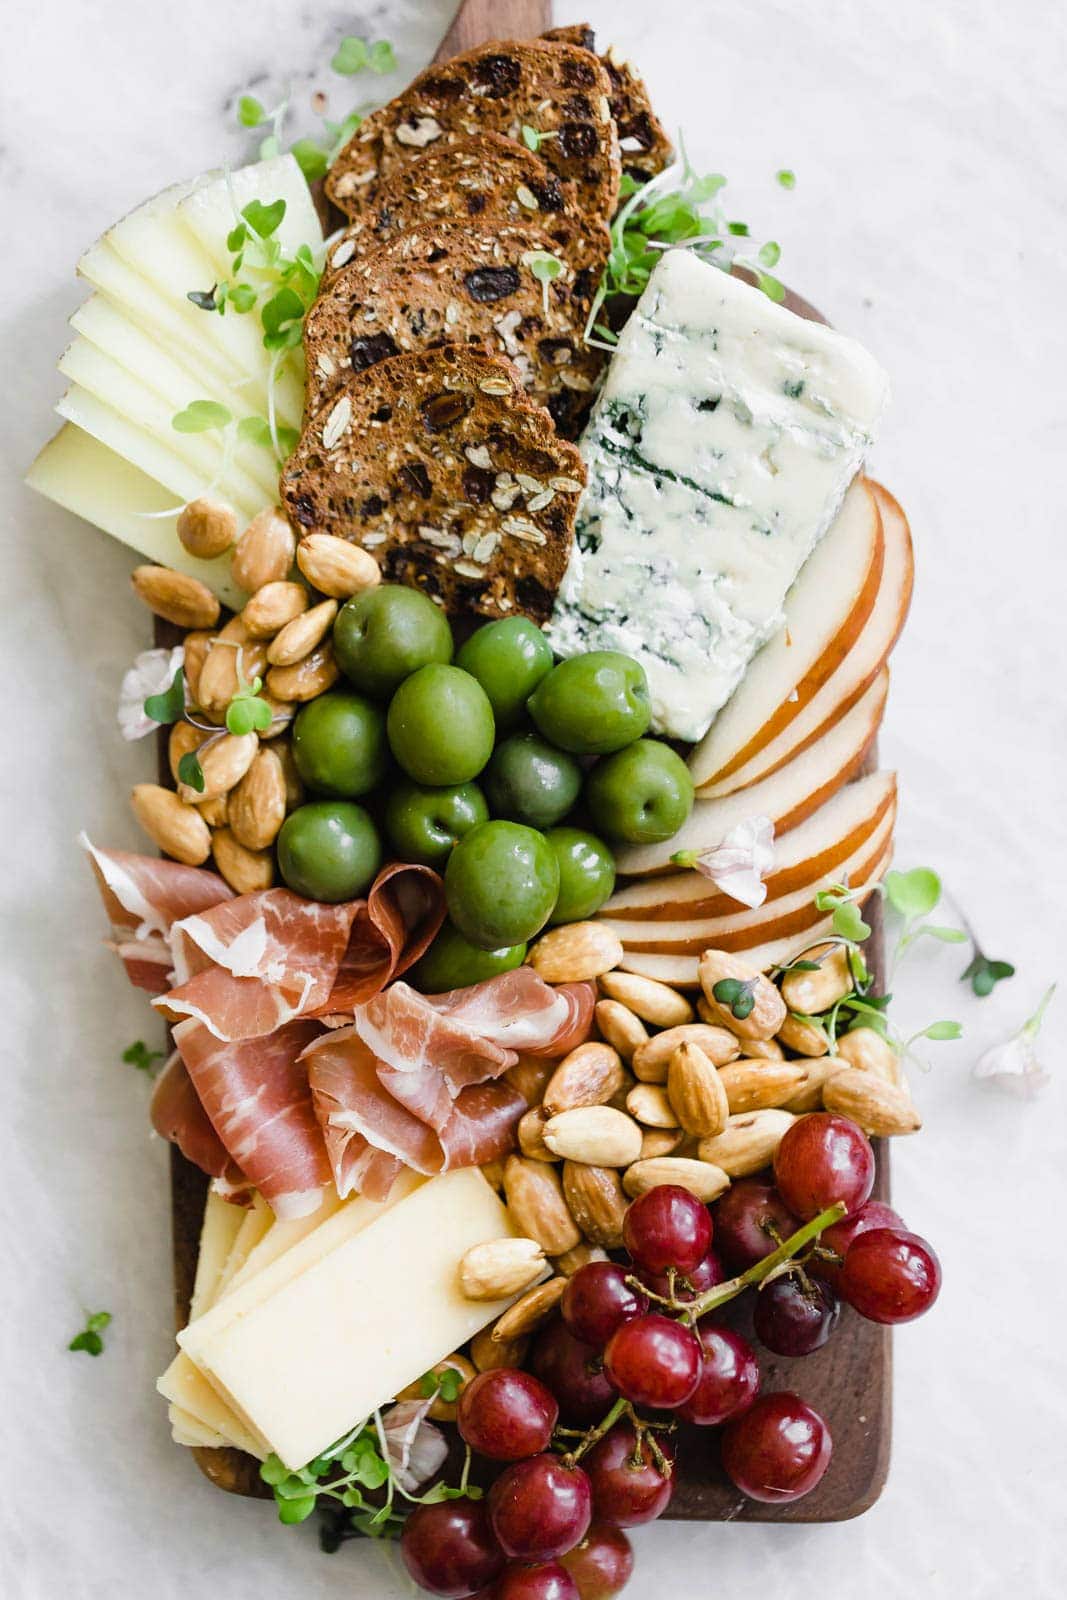 Date Night Cheese Board Ideas for Two | How To Make A ...